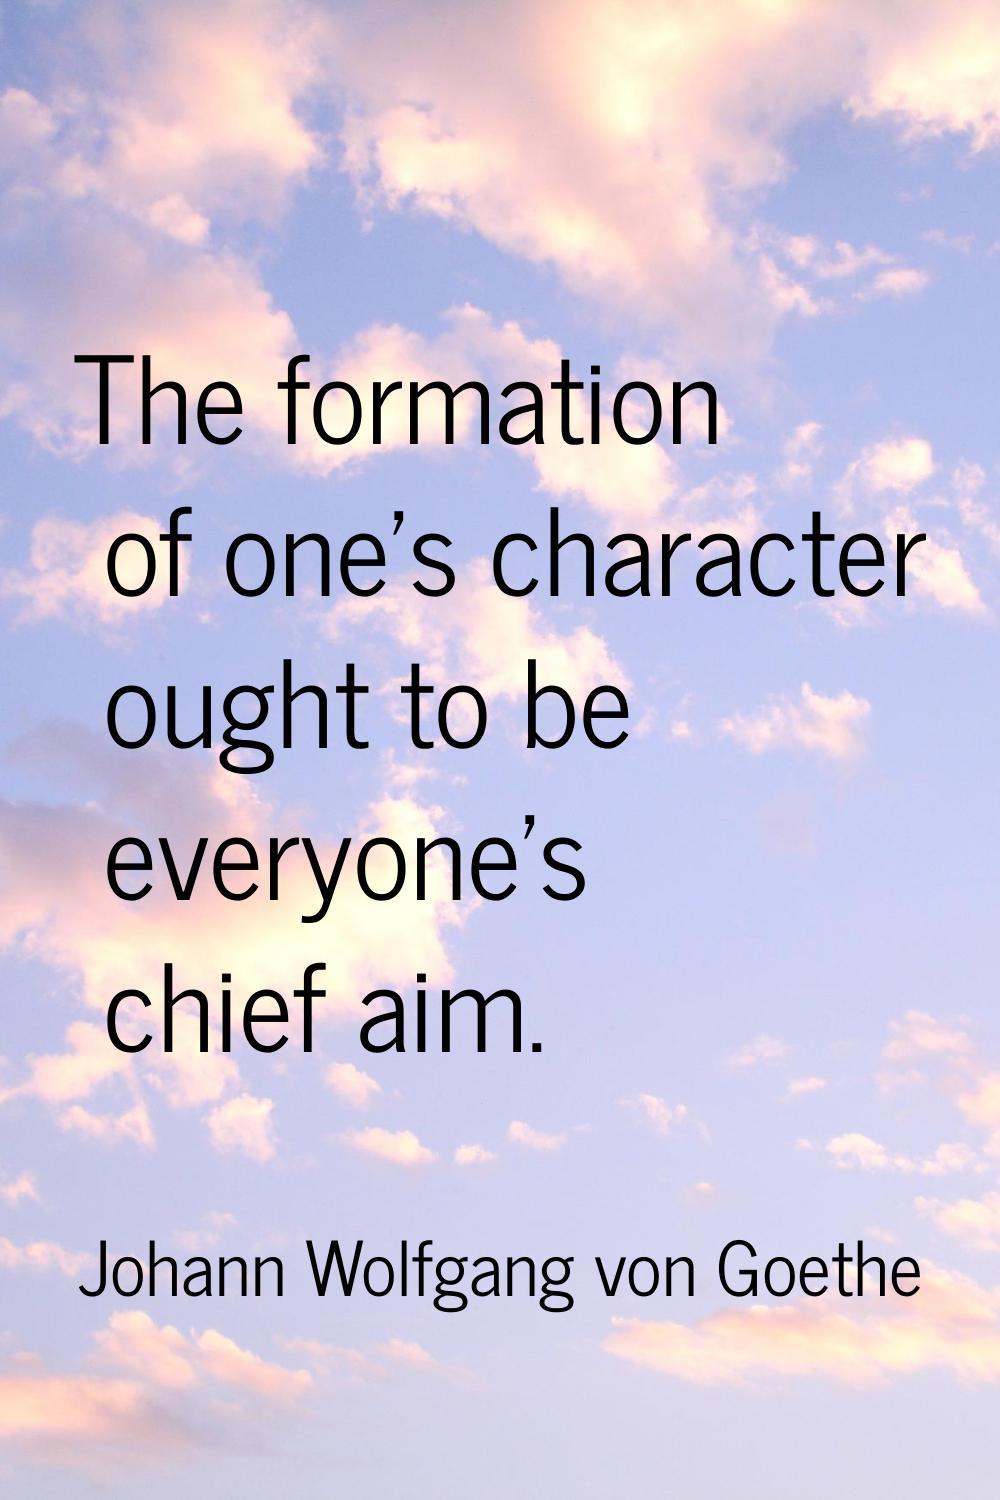 The formation of one's character ought to be everyone's chief aim.